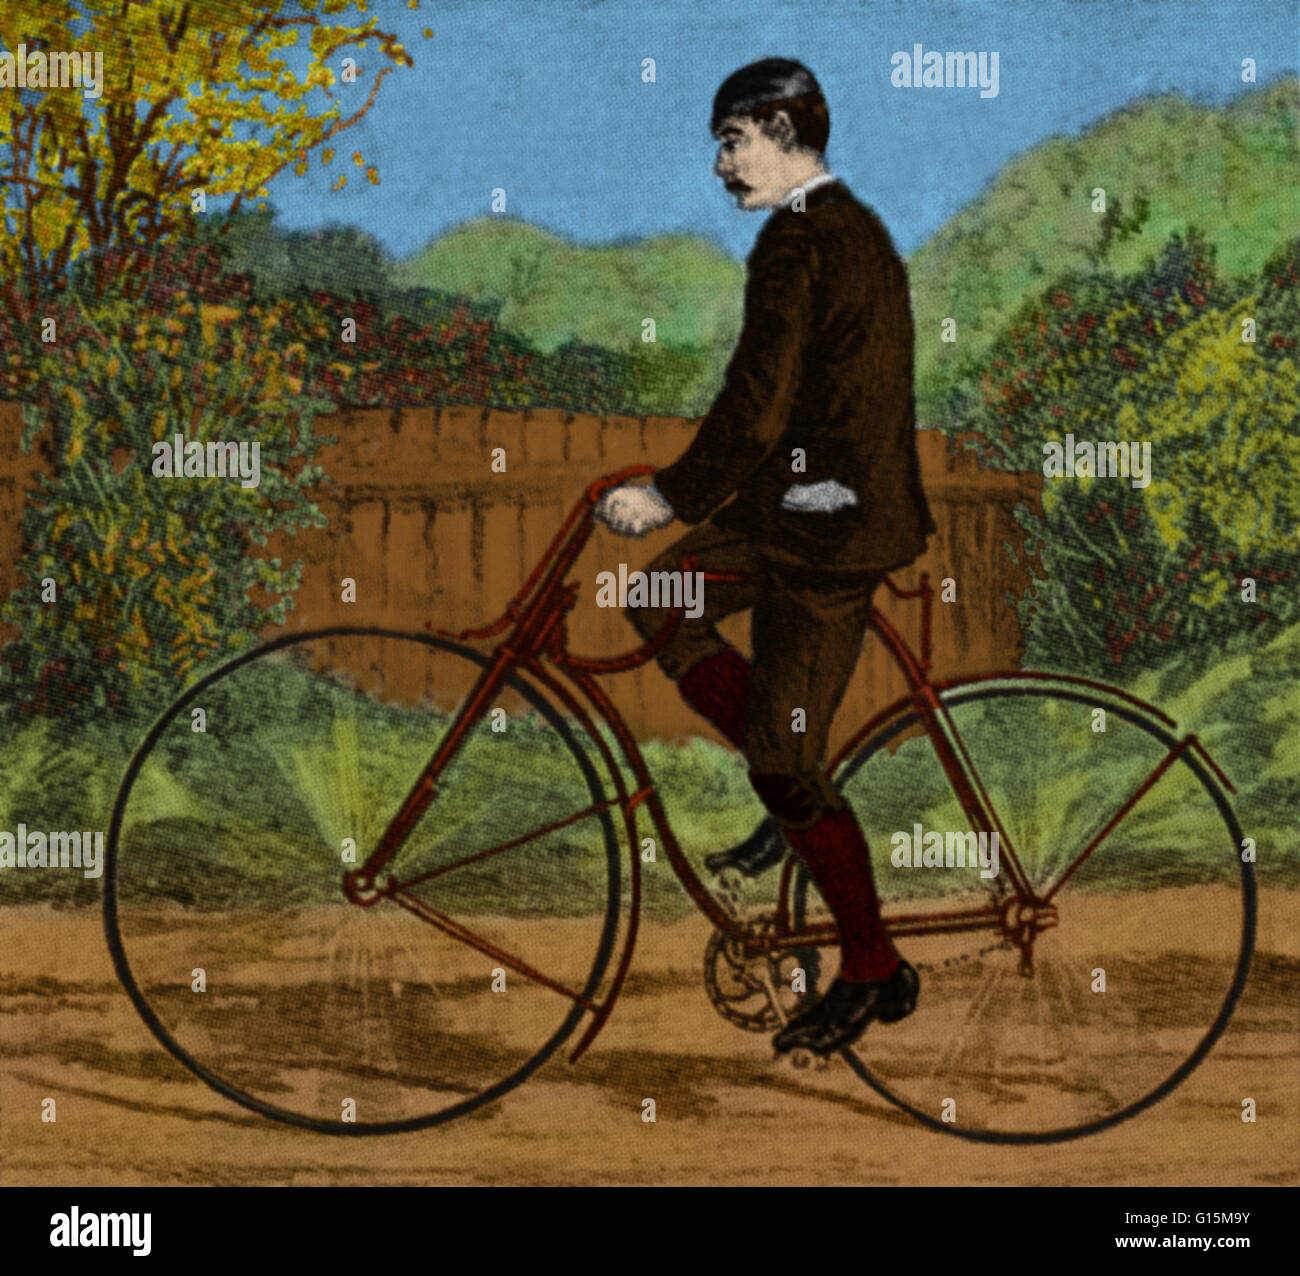 Period illustration of a man riding a Rover Safety Bicycle. This bicycle, which made its debut in 1885, is generally considered the first recognizably modern bicycle. Stock Photo